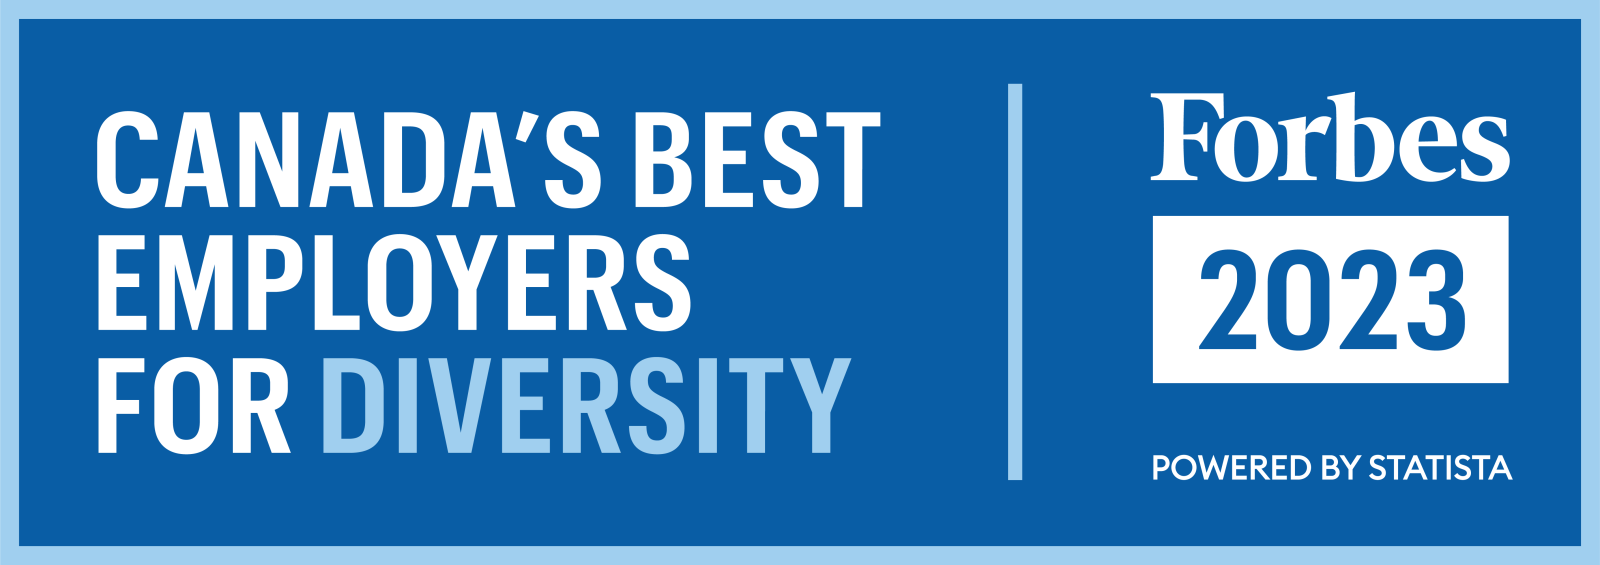 Canada's Best Employer for Diversity - Forbes 2023 - Powered by Statista